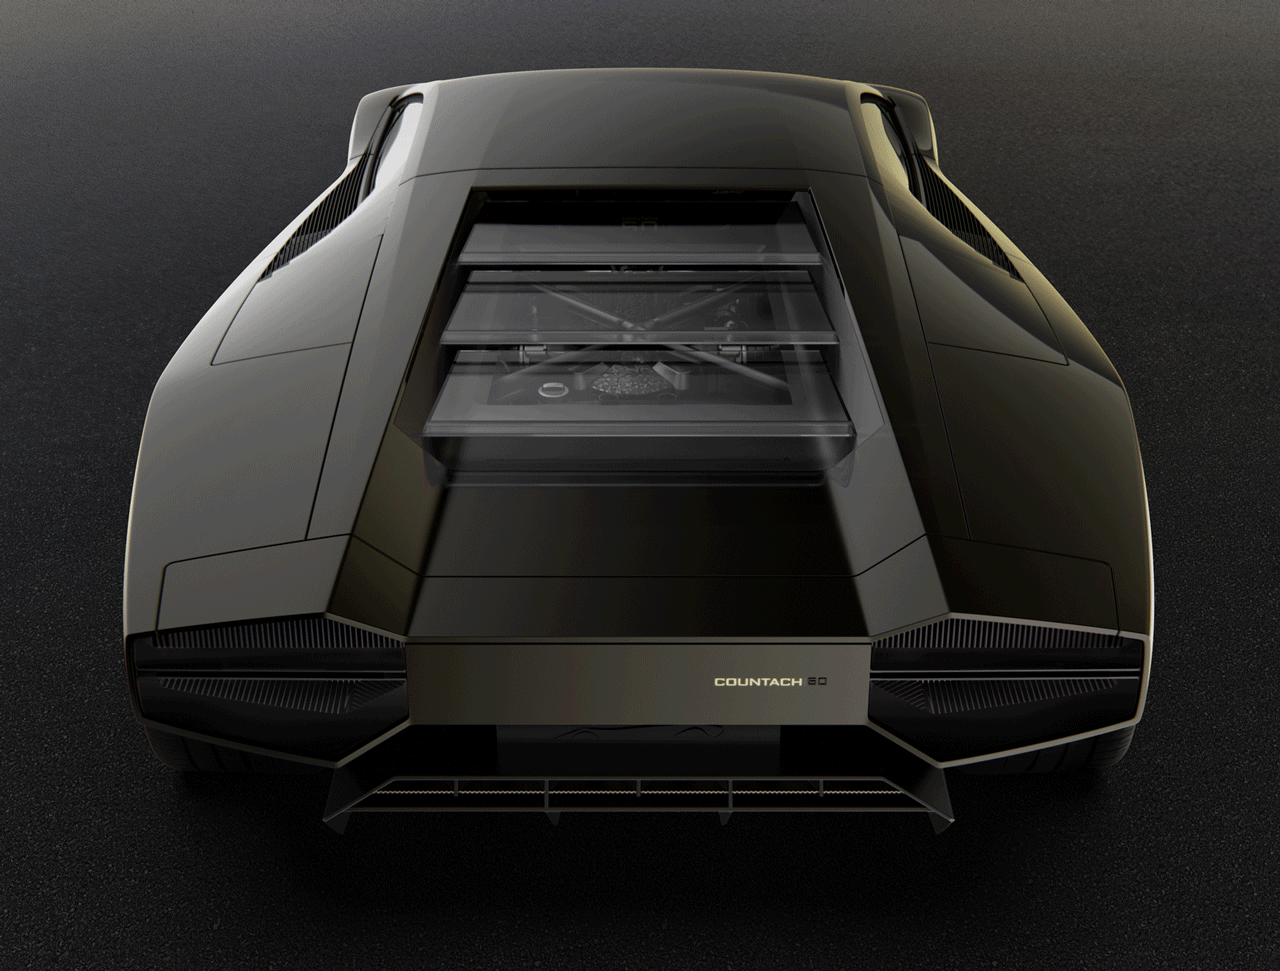 The Lamborghini Countach gets a GORGEOUS minimalist redesign after